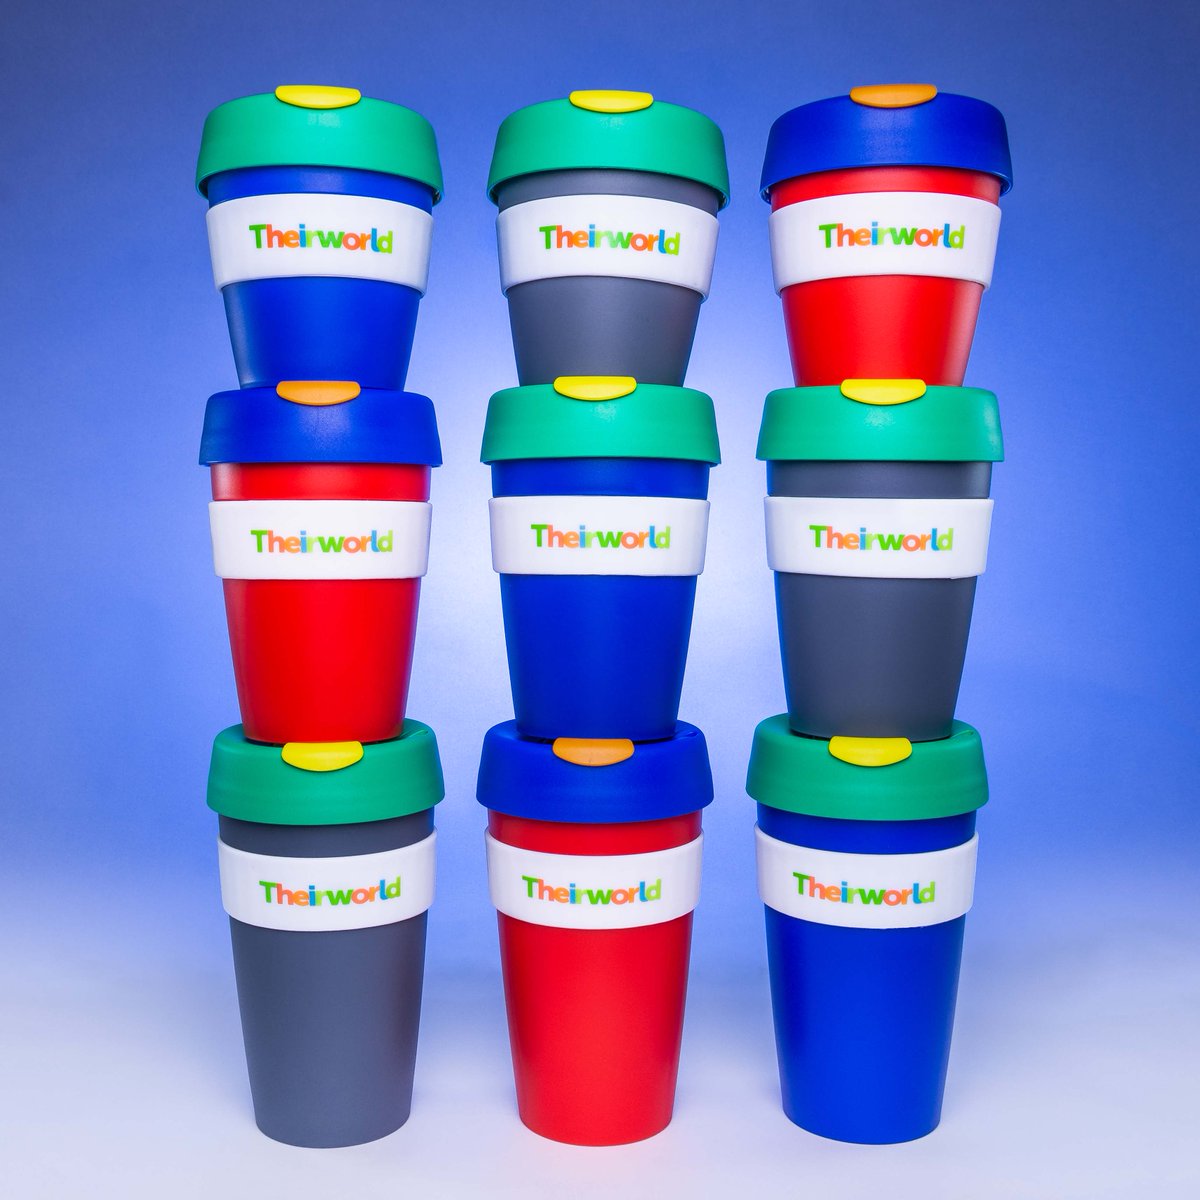 shop.theirworld.org/collections/th… @theirworld #makeimpossiblepossible one cup at a time.